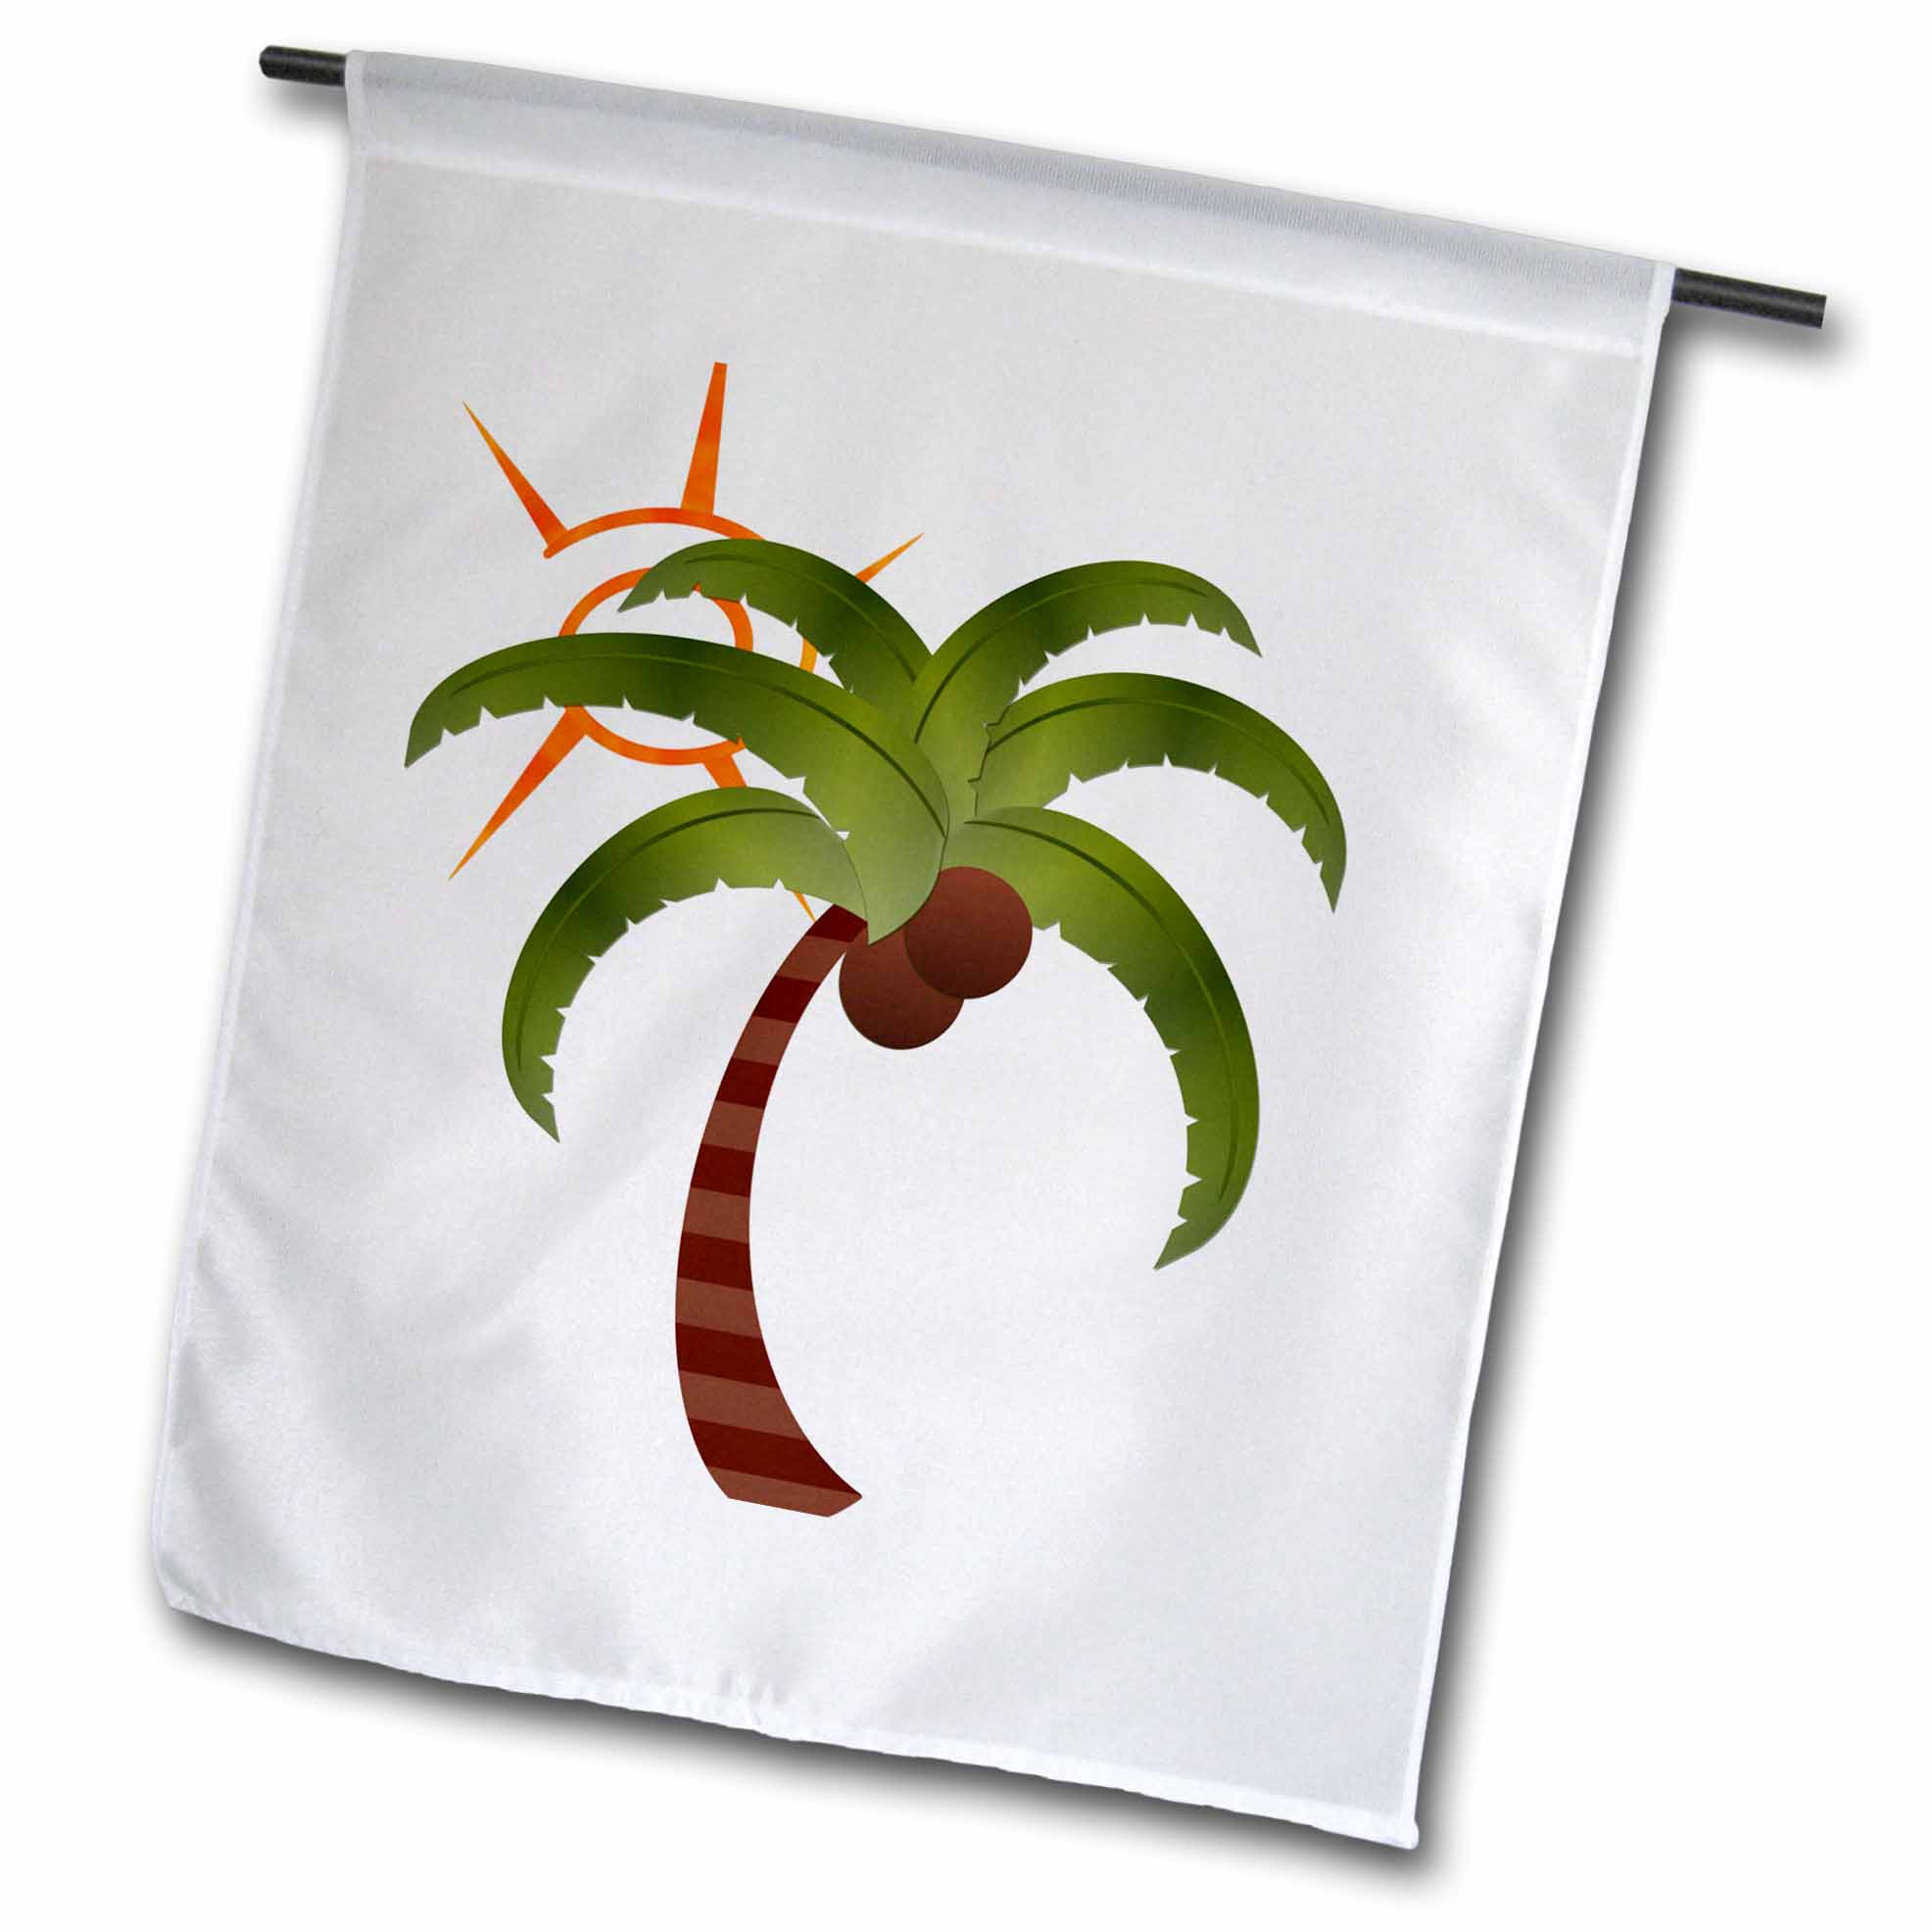 3dRose Palm Tree and the Sun - Garden Flag, 12 by 18-inch - image 1 of 1